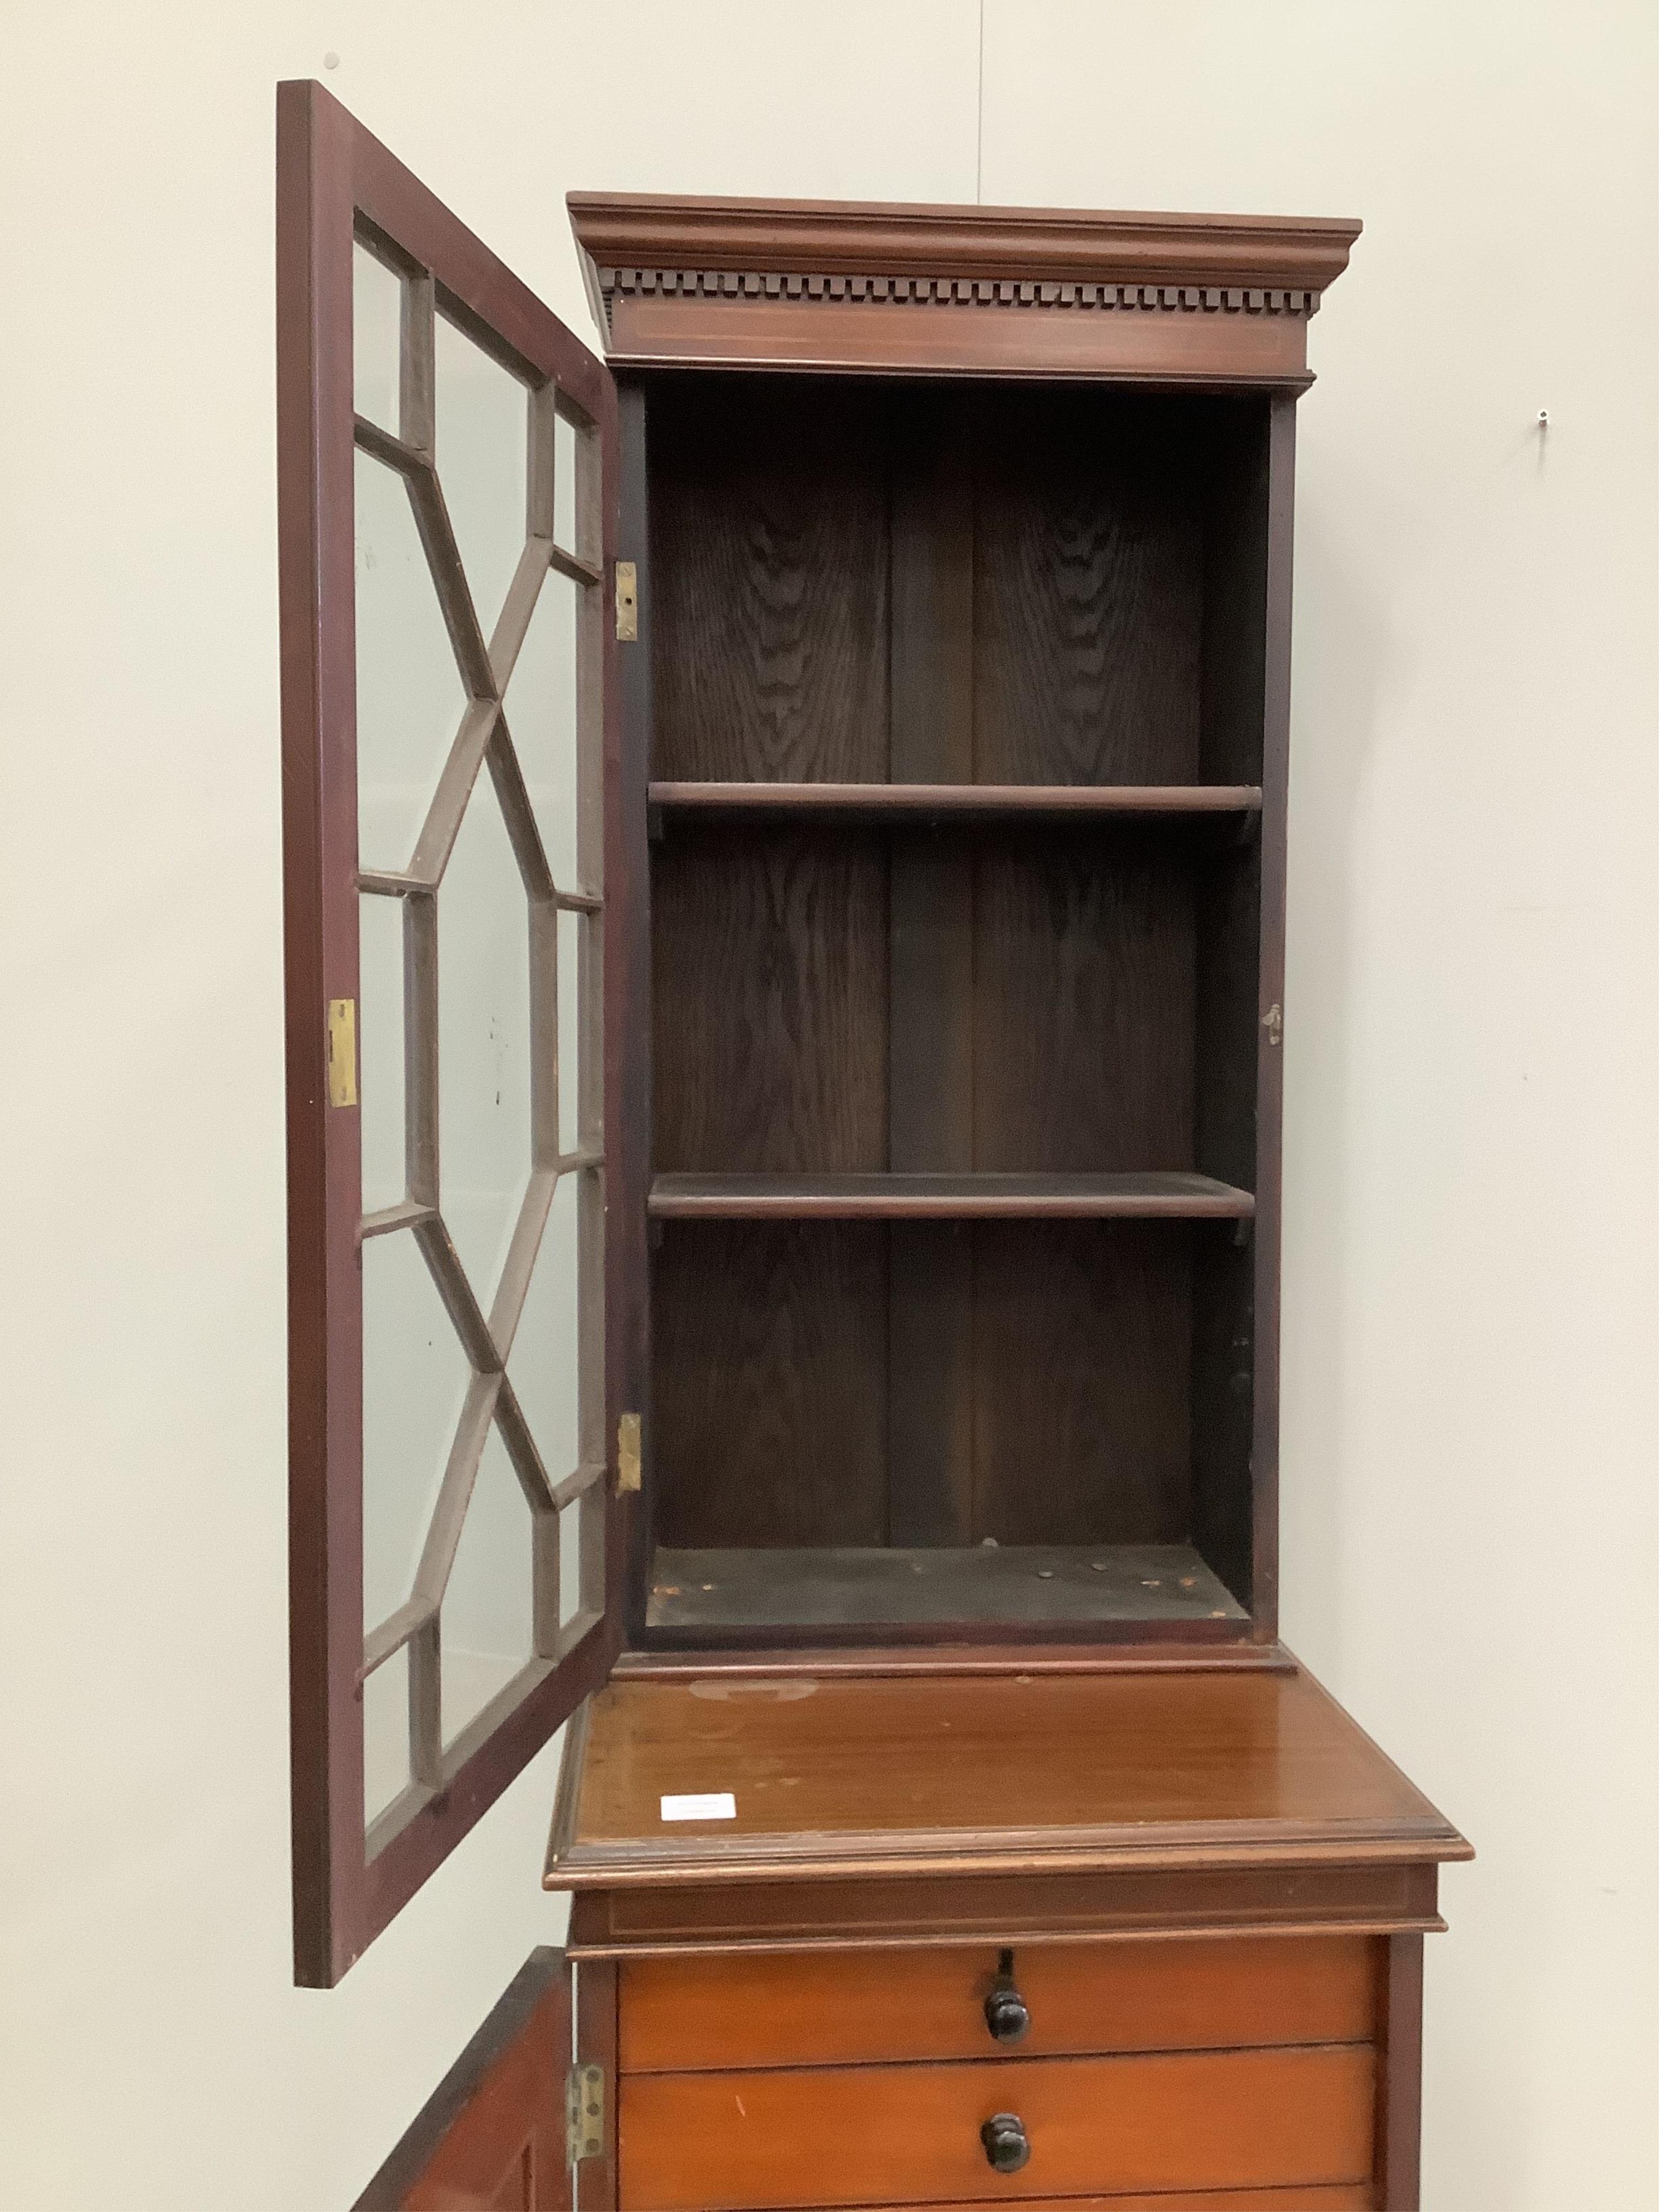 An Edwardian inlaid mahogany bookcase / collector's cabinet of narrow proportions, width 51cm, depth 46cm, height 187cm